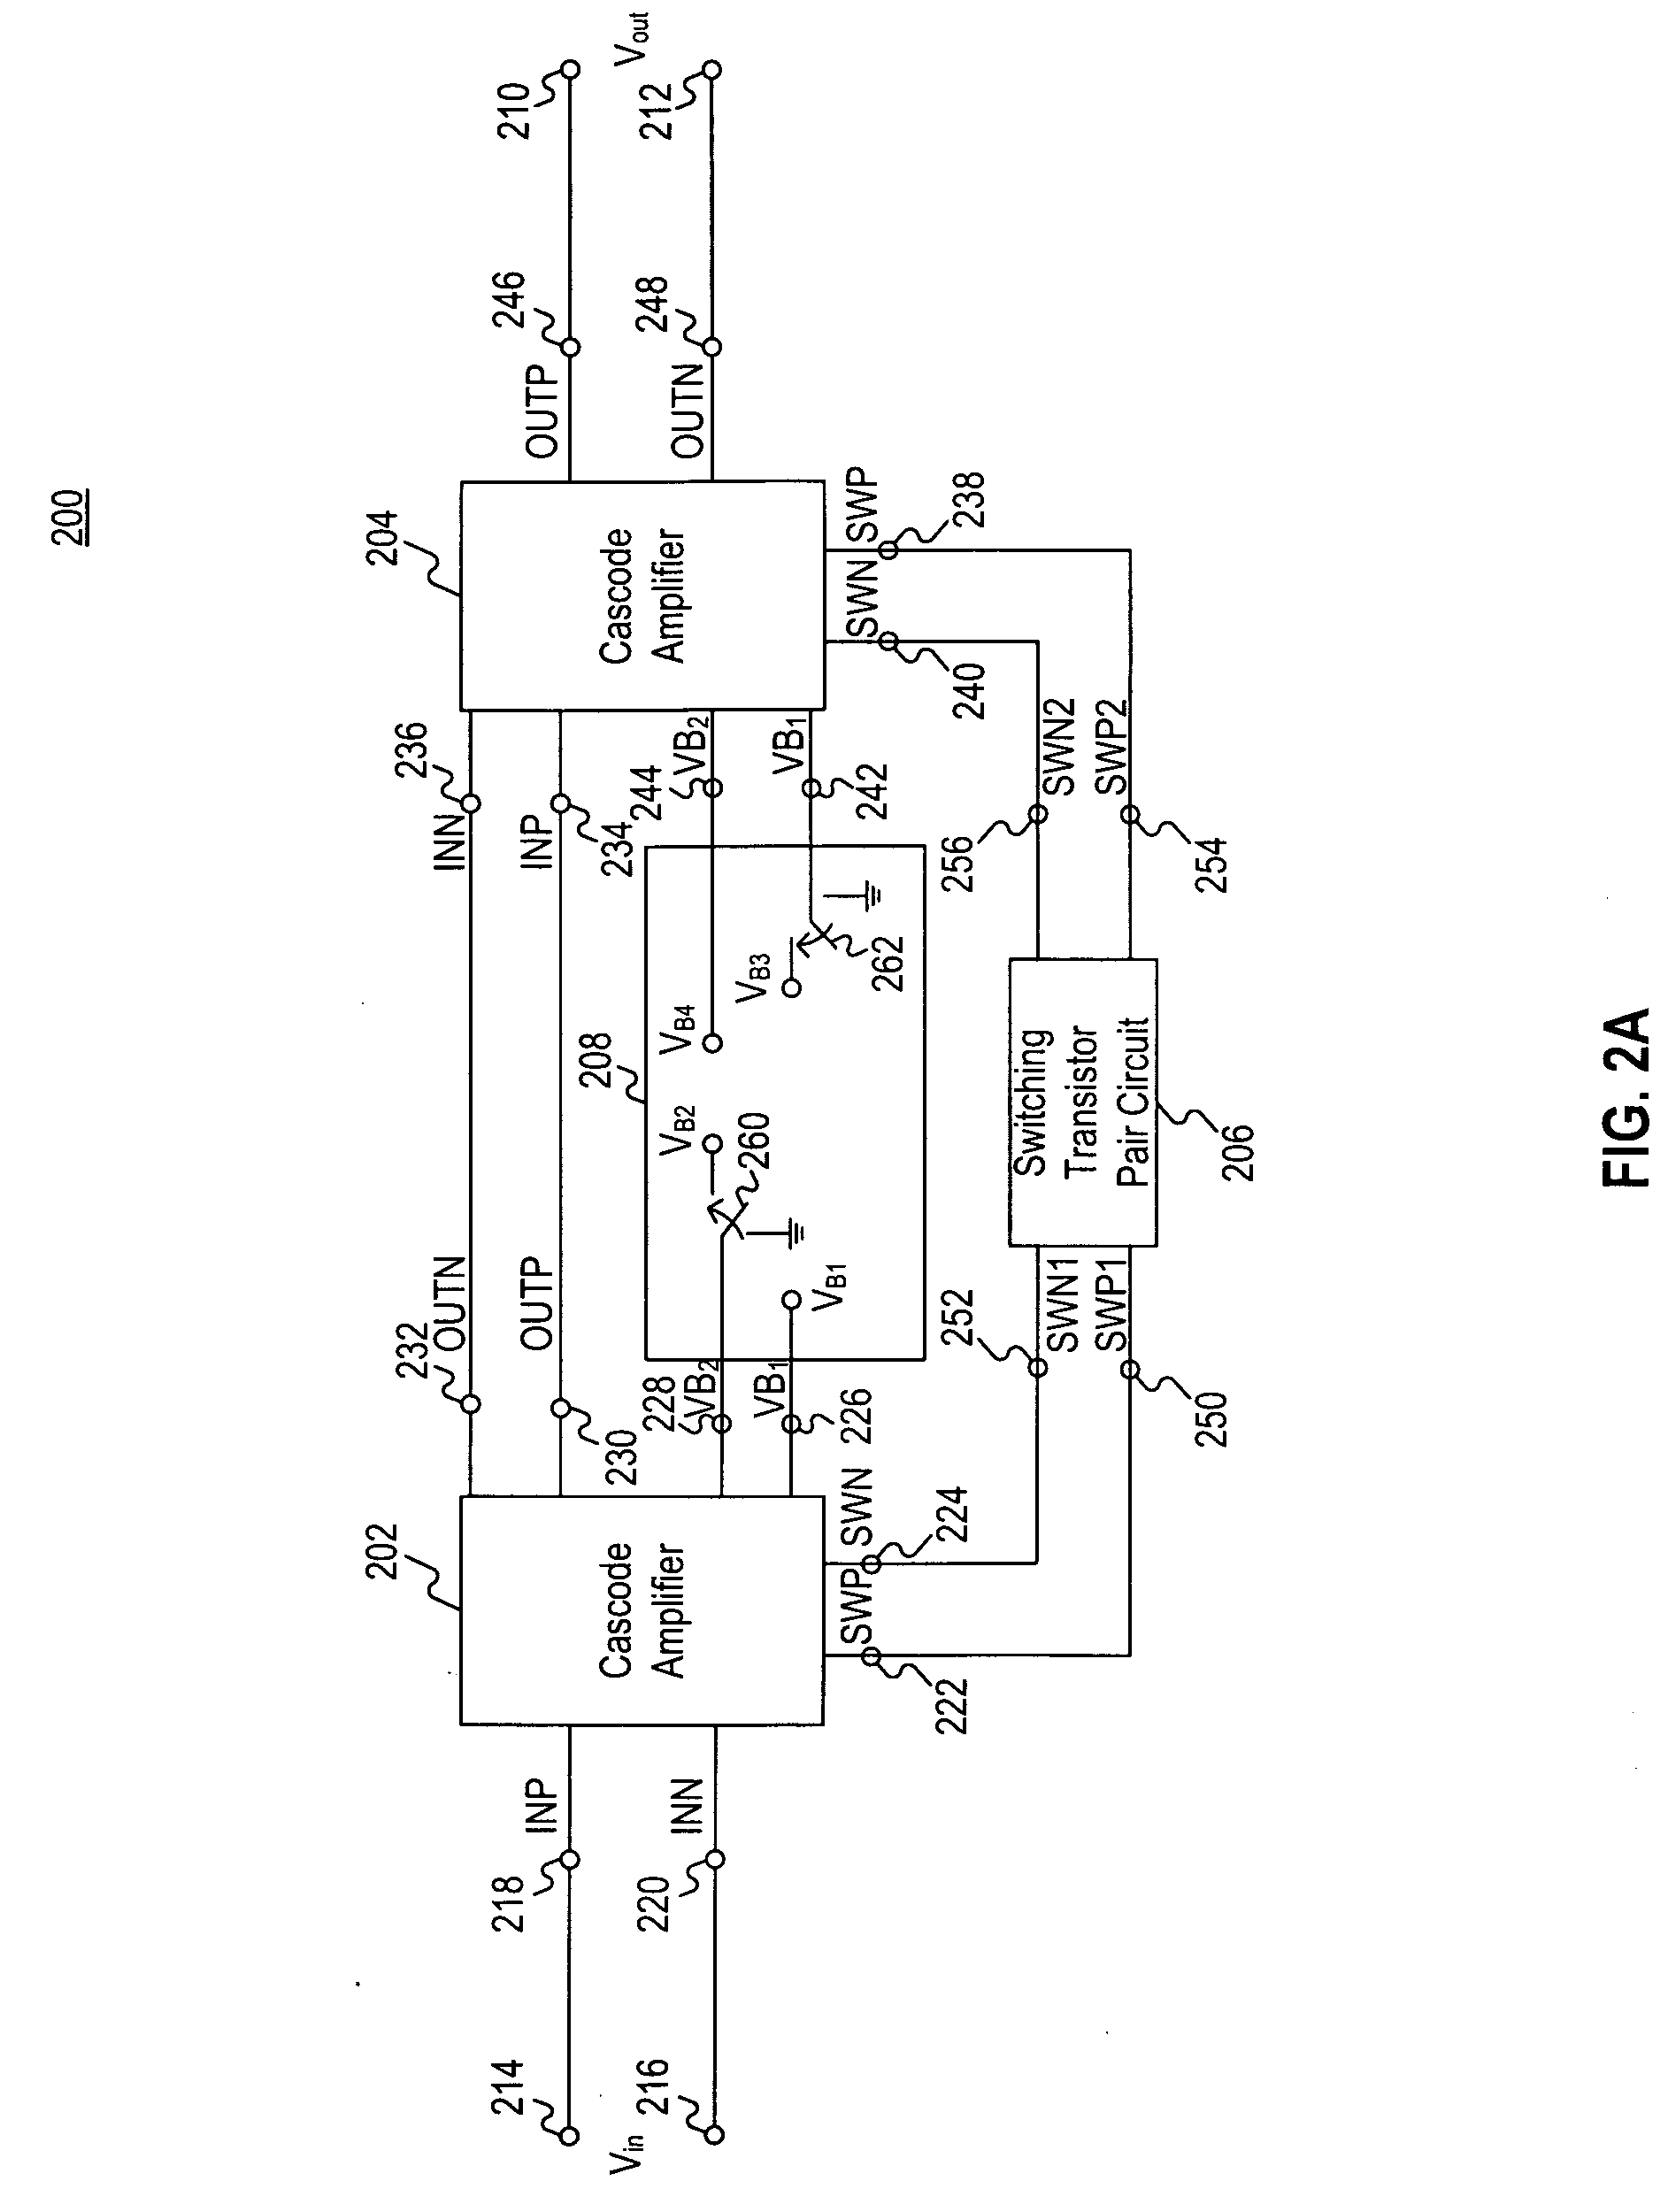 Variable gain amplifier including series-coupled cascode amplifiers